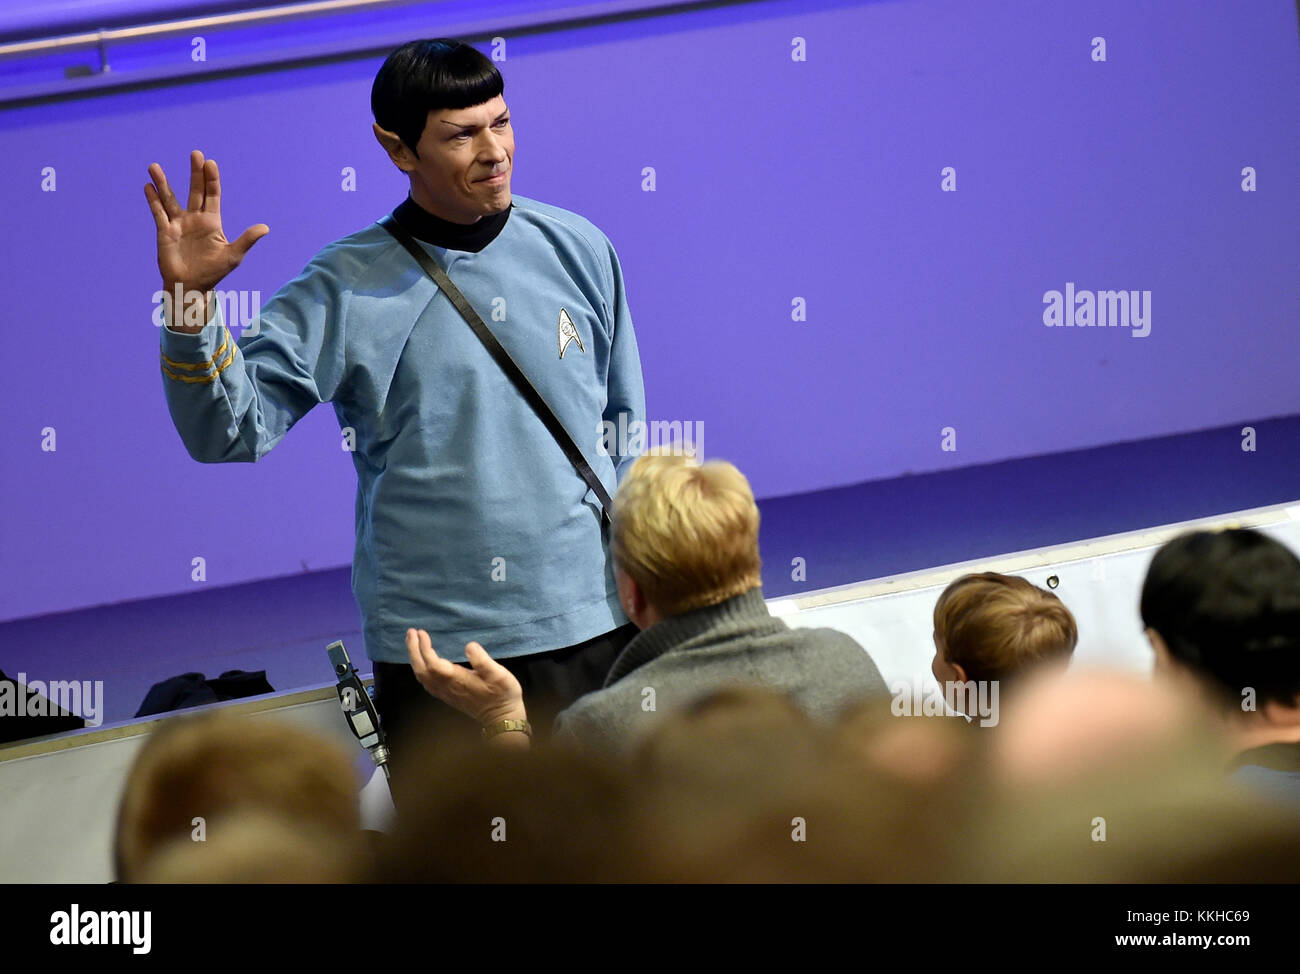 Berlin, Germany. 1st Dec, 2017. Jens welcomes the audience wearing a Mr. Spock costume from the 'Star Trek' series during the start of the Star Trek lecture on artificial intelligence and science fiction at the Beuth University of Applied Sciences ('Beuth Hochschule fuer Technik') in Berlin, Germany, 1 December 2017. Credit: Britta Pedersen/dpa-Zentralbild/dpa/Alamy Live News Stock Photo